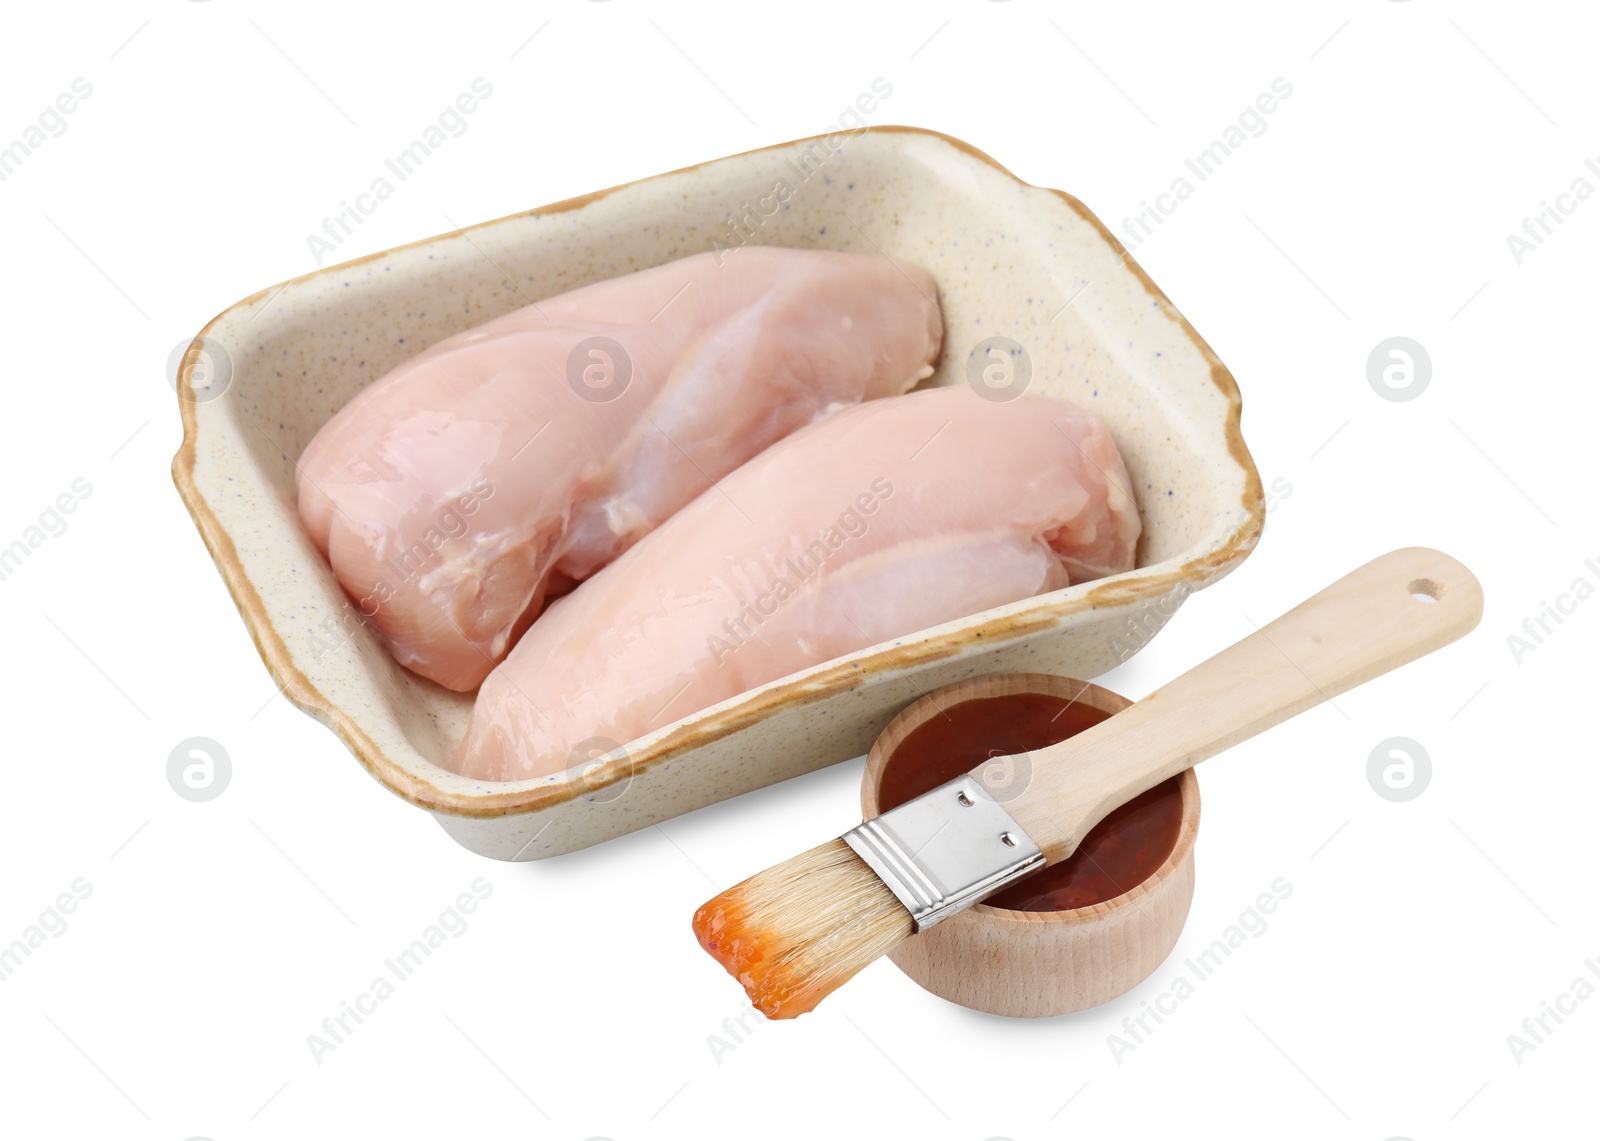 Photo of Marinade, basting brush, raw chicken fillets and chili peppers isolated on white